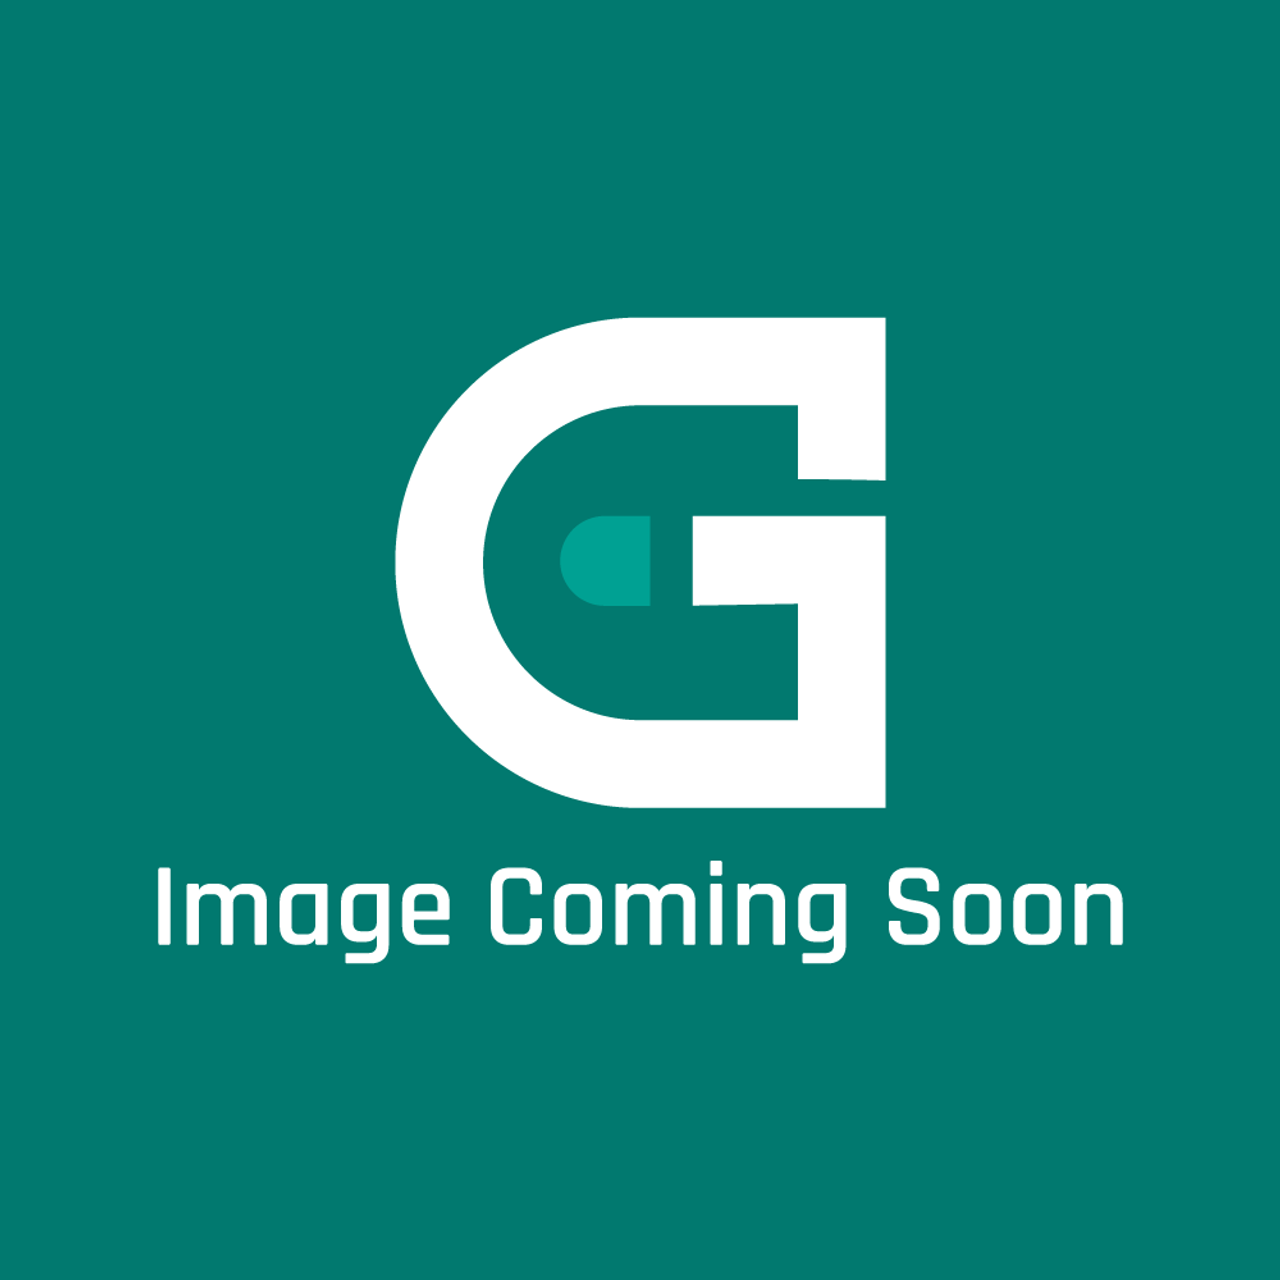 GE Appliances WR55X30630 - Interface Top Asm Black - Image Coming Soon!